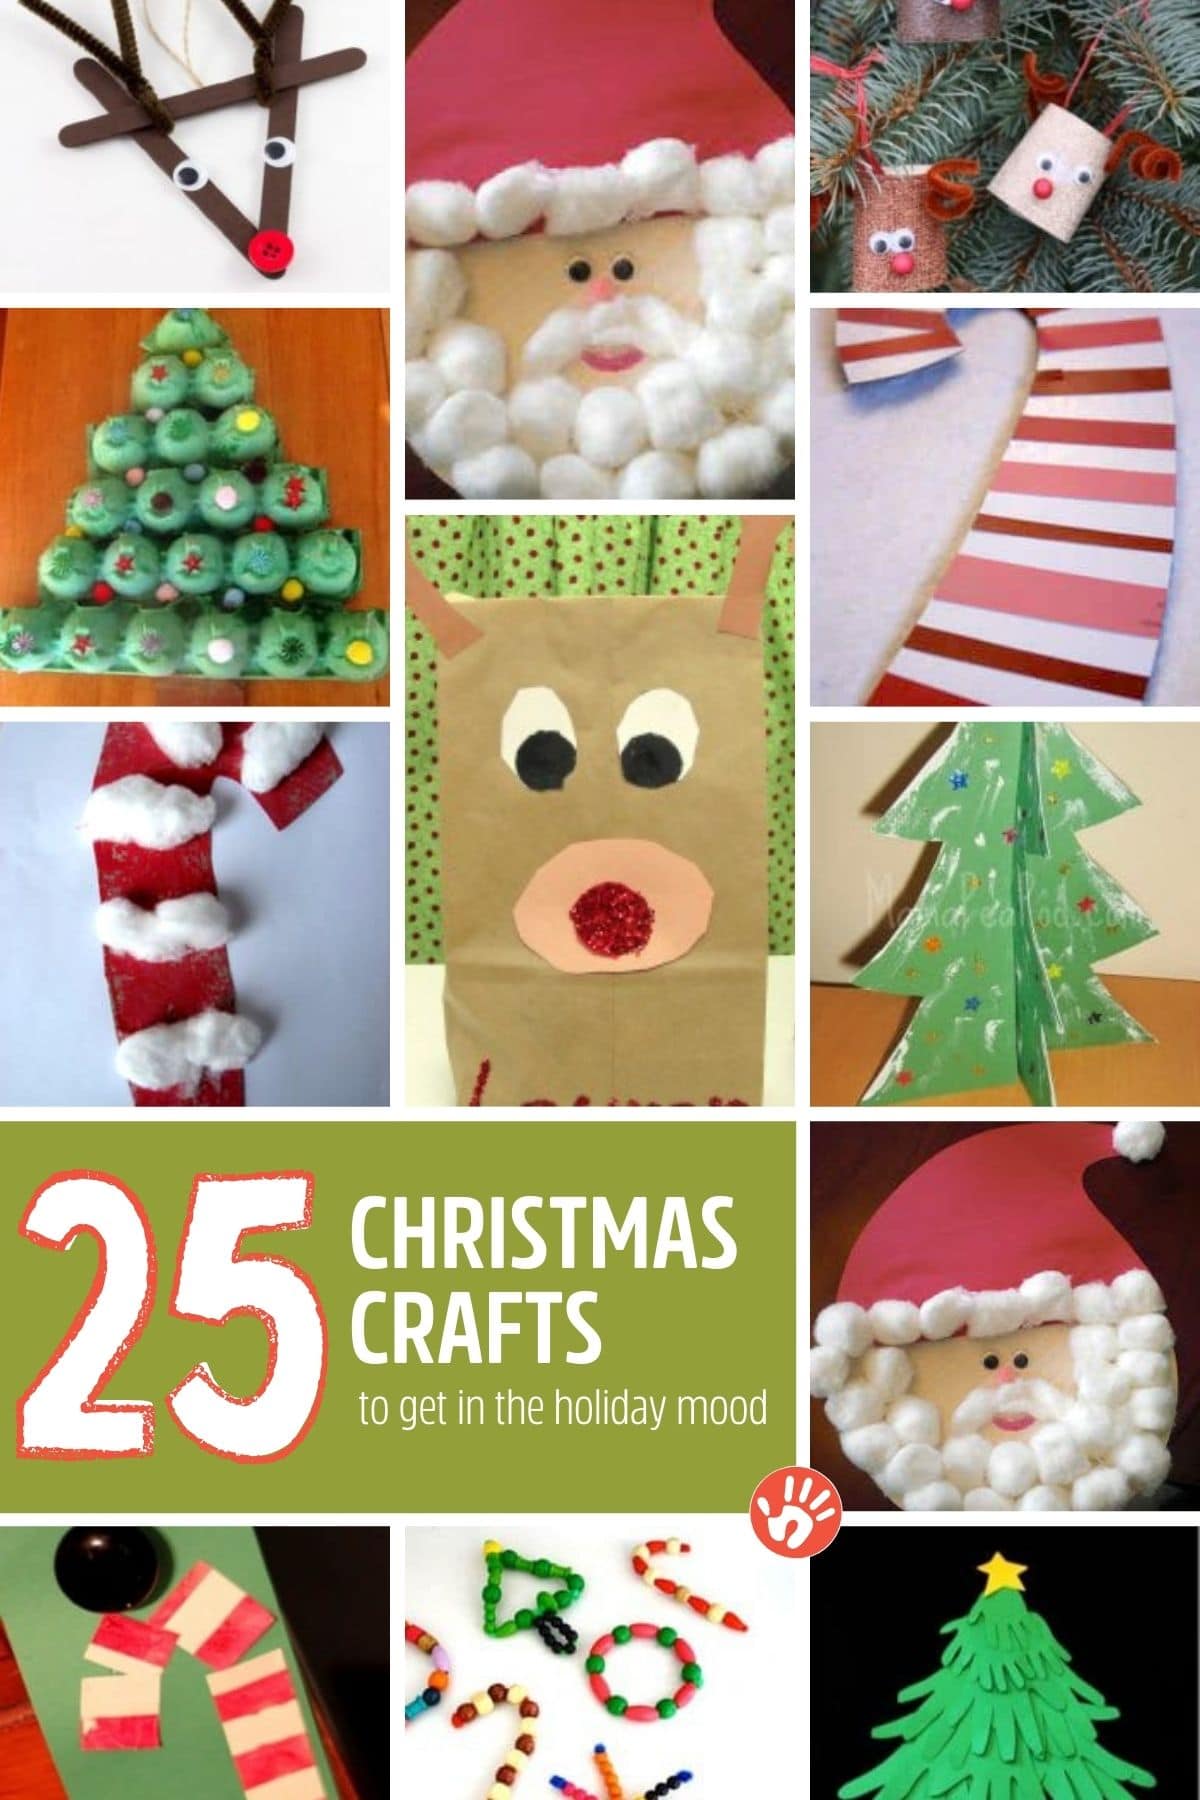 21 Best Christmas Gift Ideas for Moms from Daughters - Crafting a